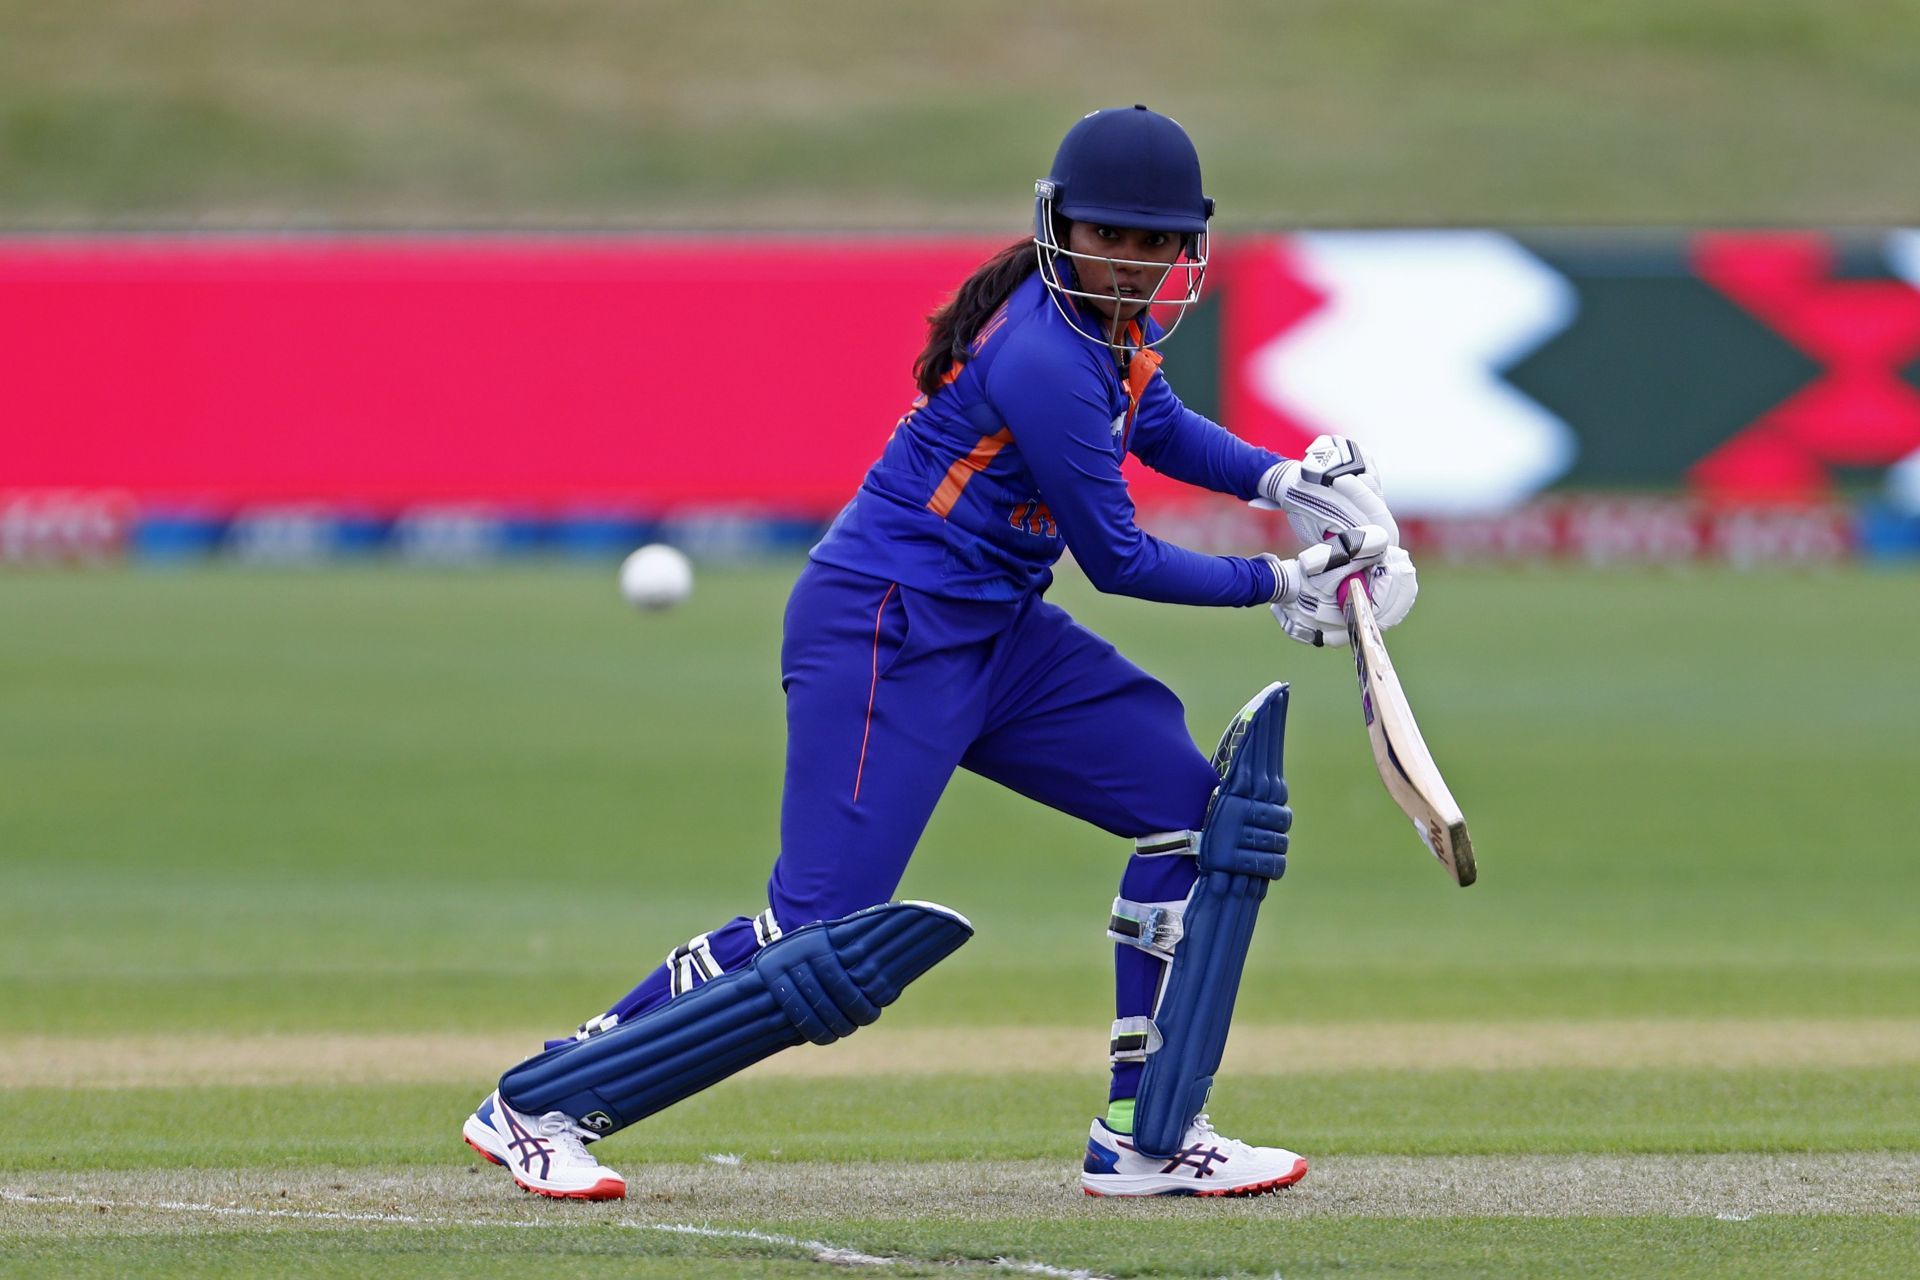 Sabbineni Meghana was acquired by the Gujarat Giants for ₹30 lakh.